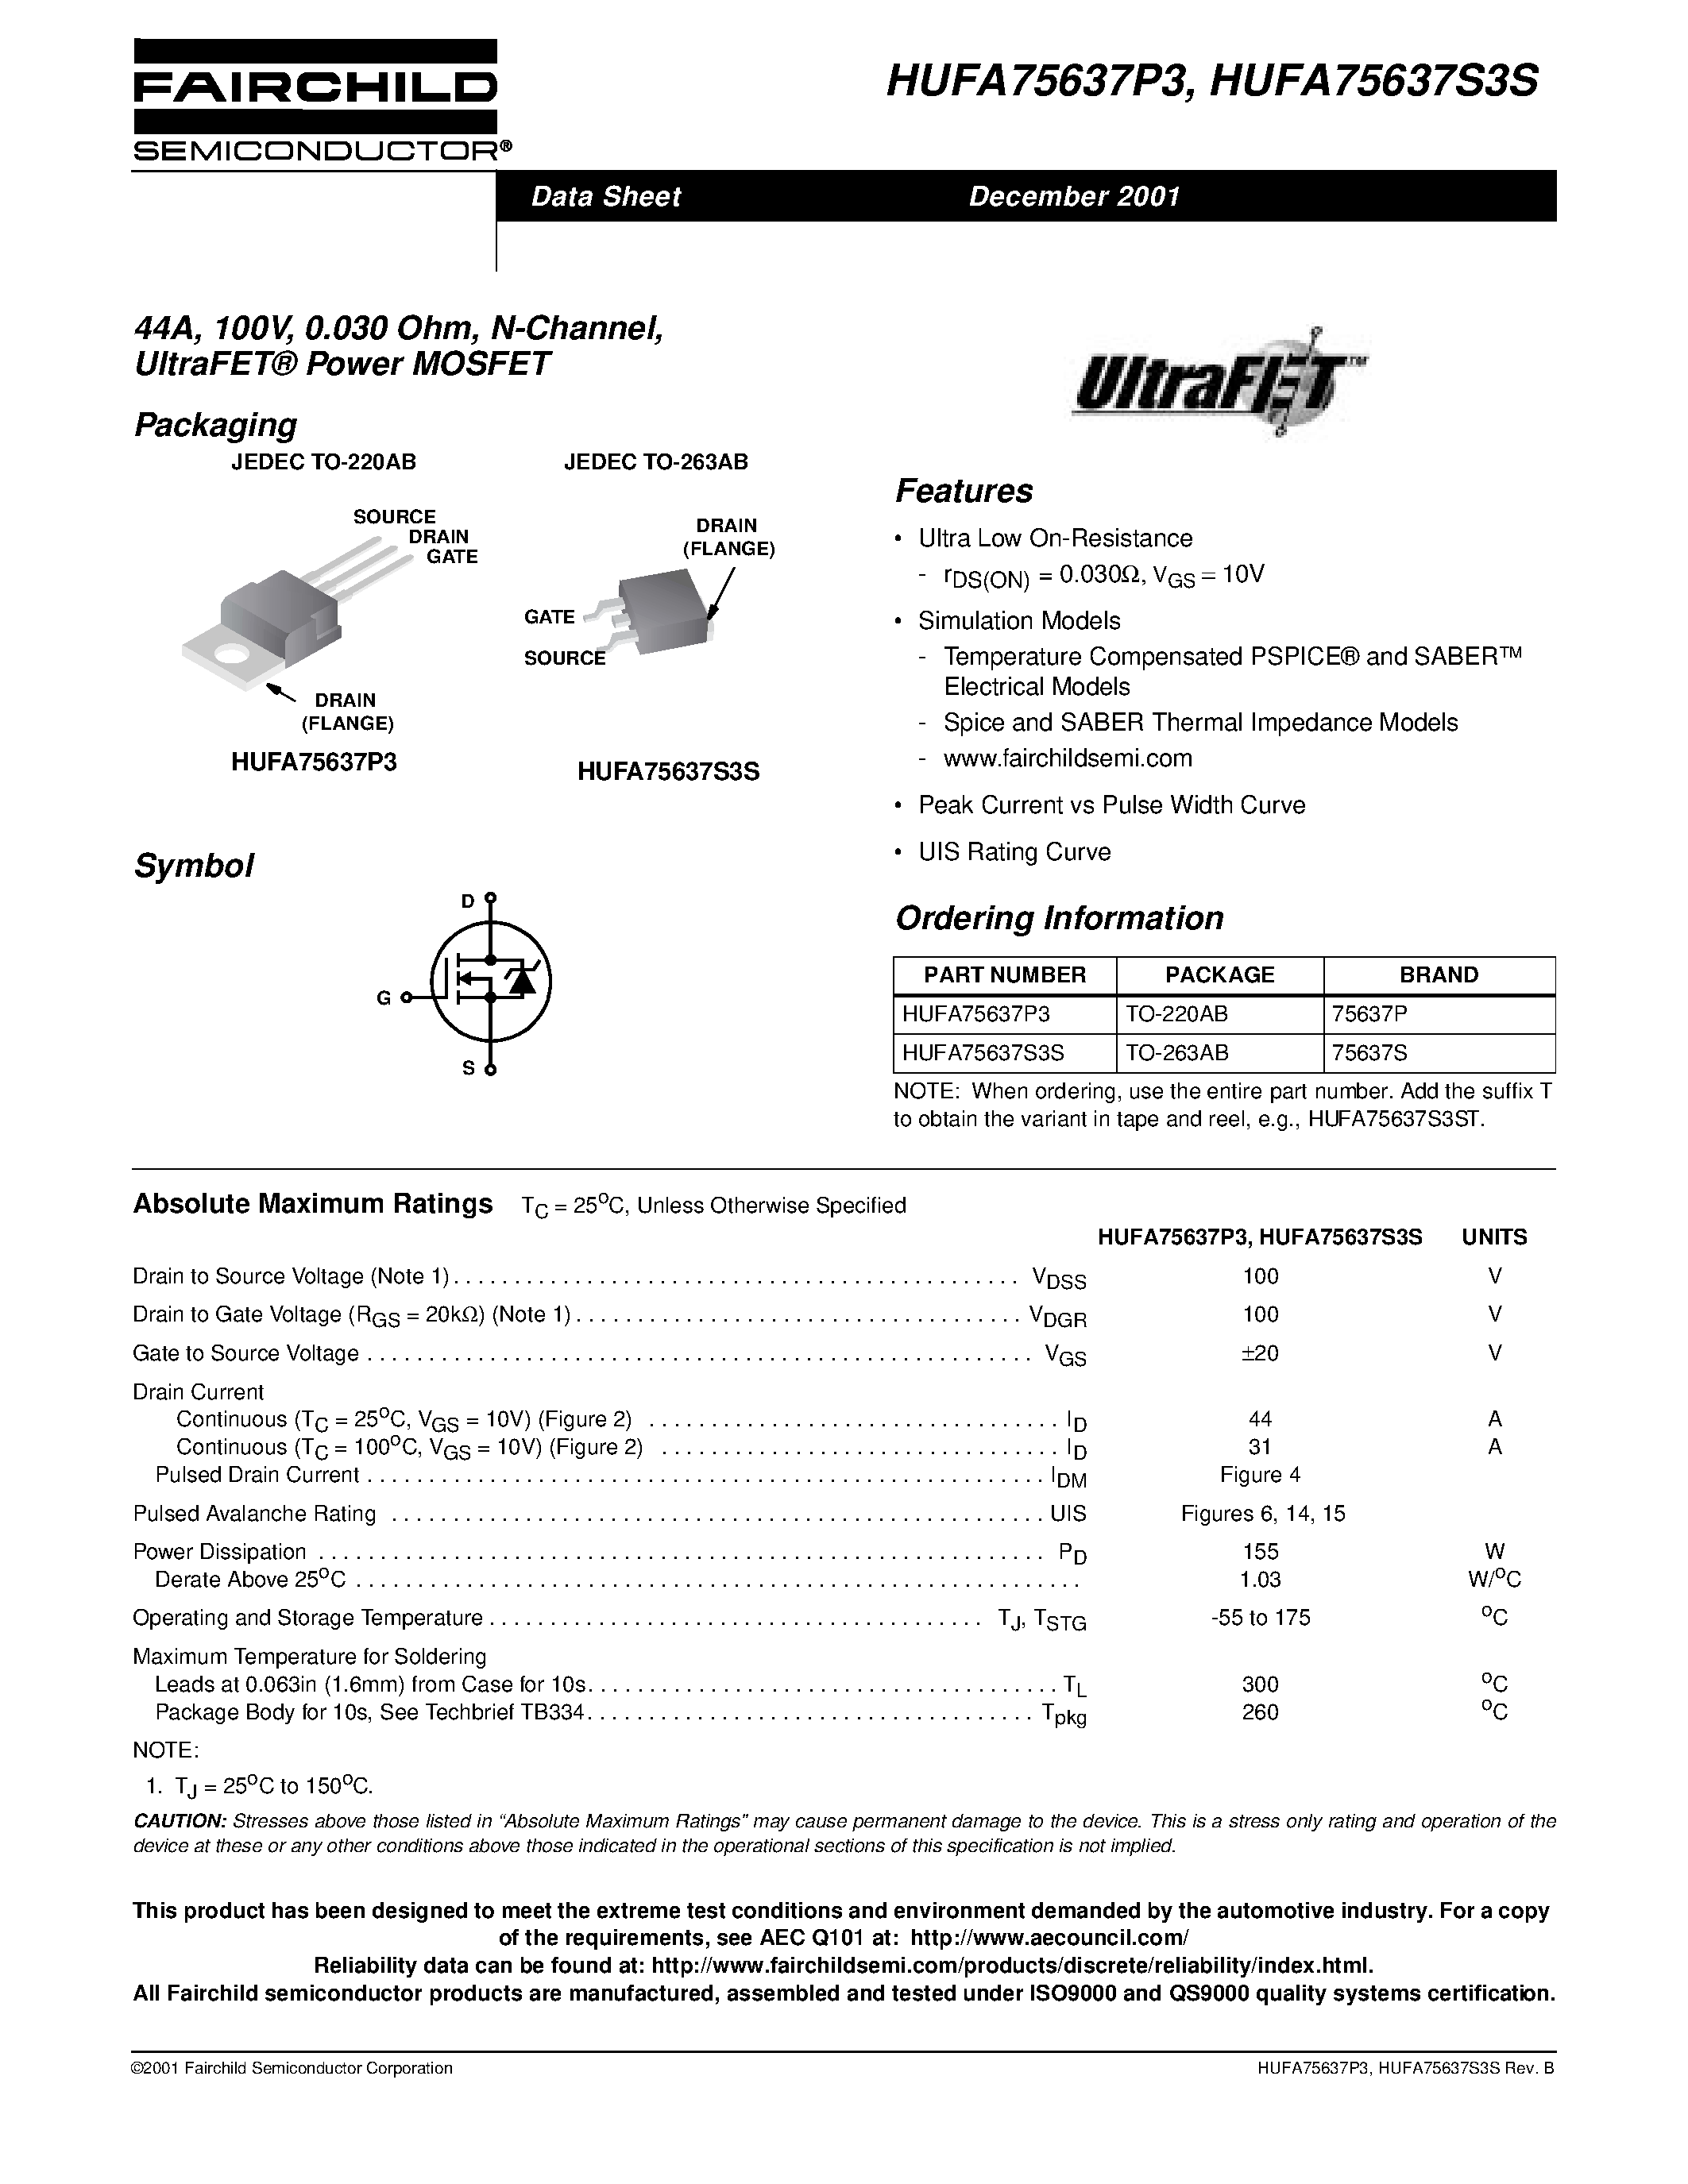 Datasheet HUFA75637P3 - 44A/ 100V/ 0.030 Ohm/ N-Channel/ UltraFET Power MOSFET page 1